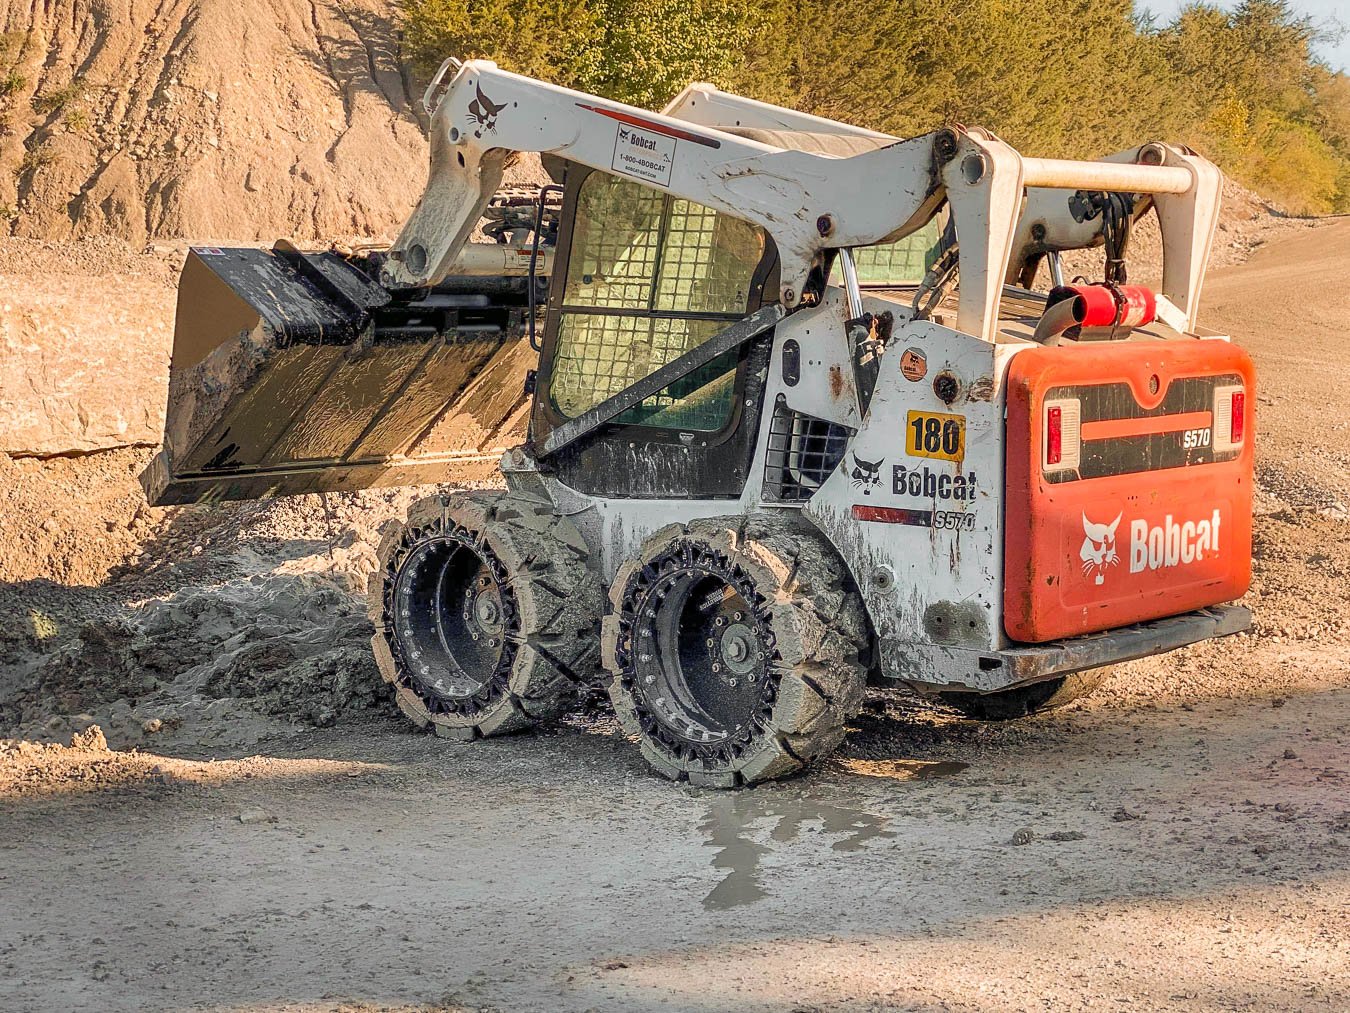 This image shows a Bobcat S570 with our Bobcat solid tires the EWRS-HS